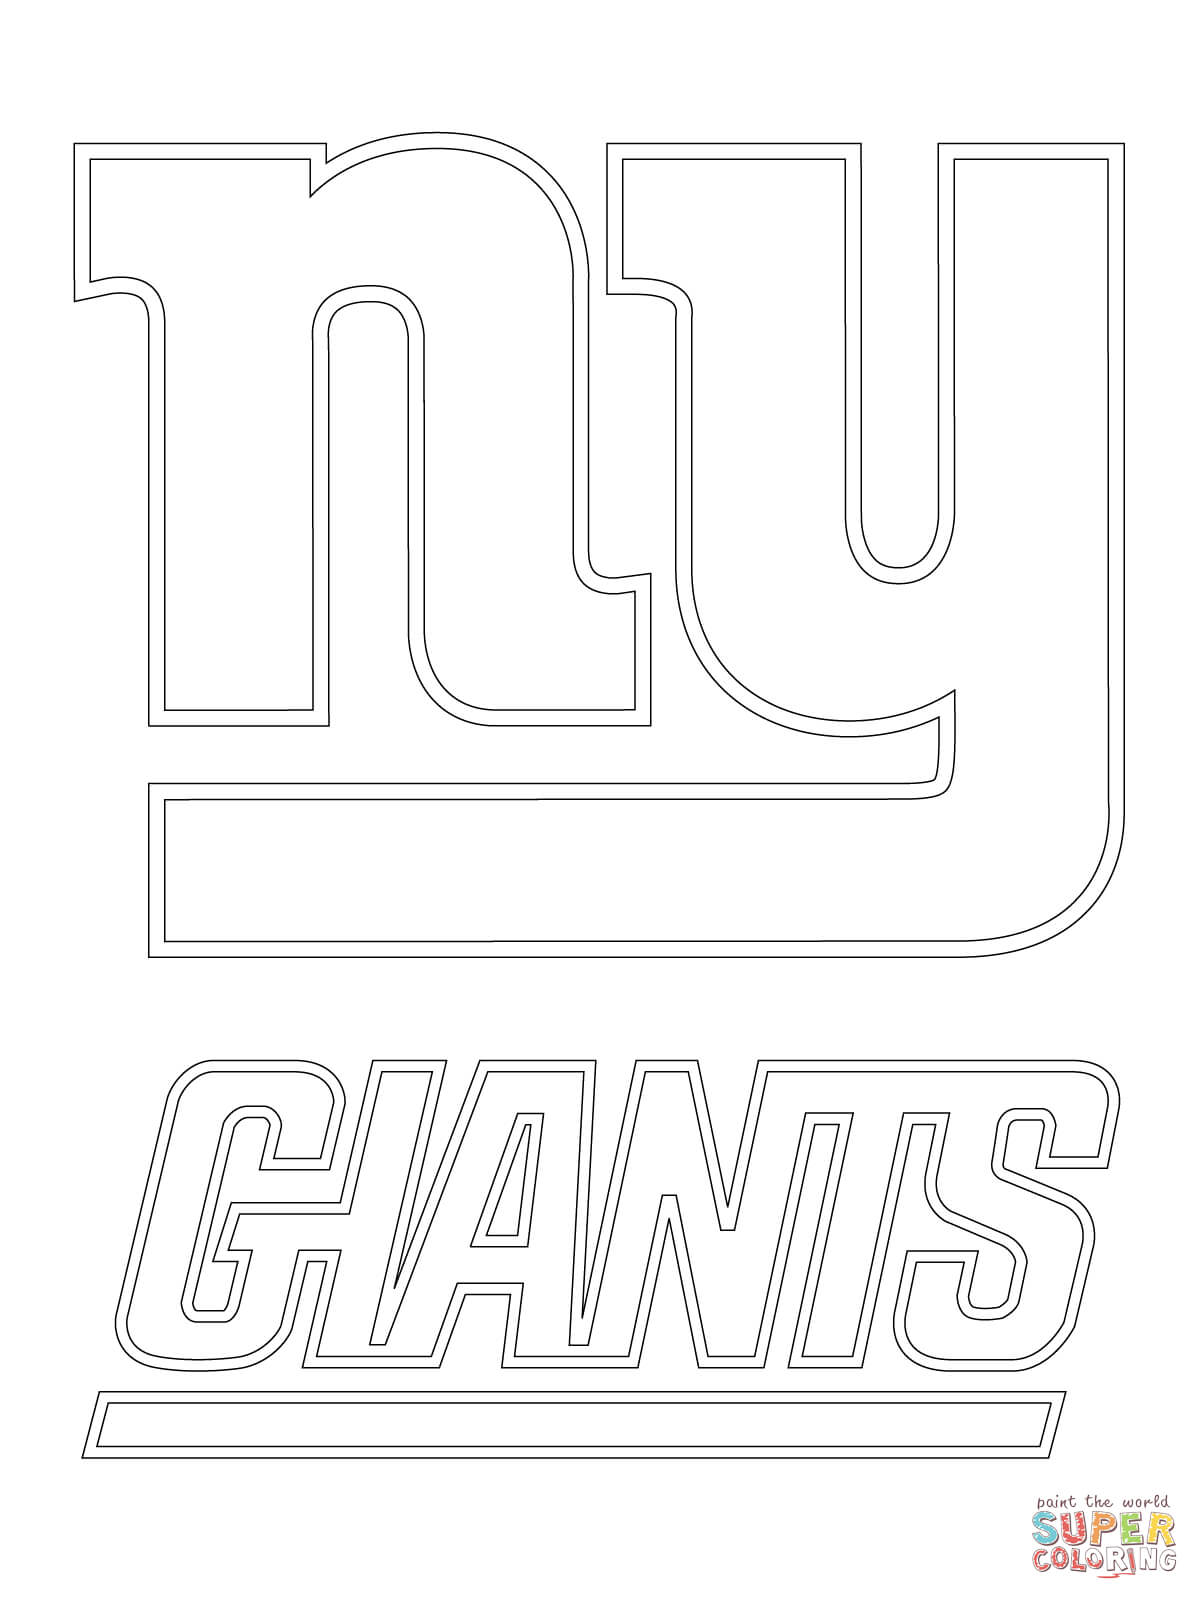 Football Coloring Pages New York Giants - Coloring Home